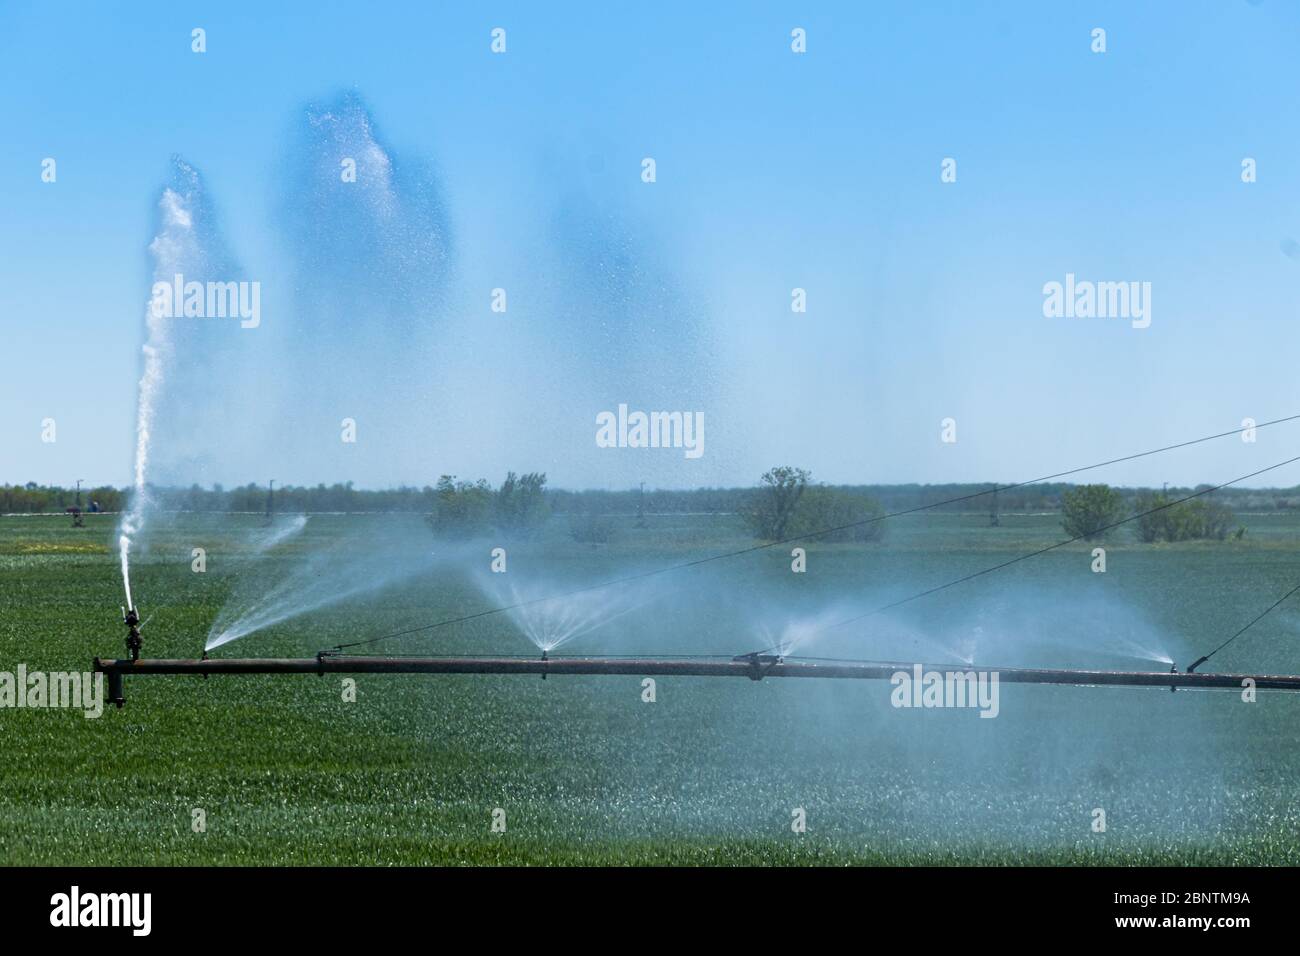 Center pivot crop irrigation or irrigating system for farm management sprays water on the field Stock Photo